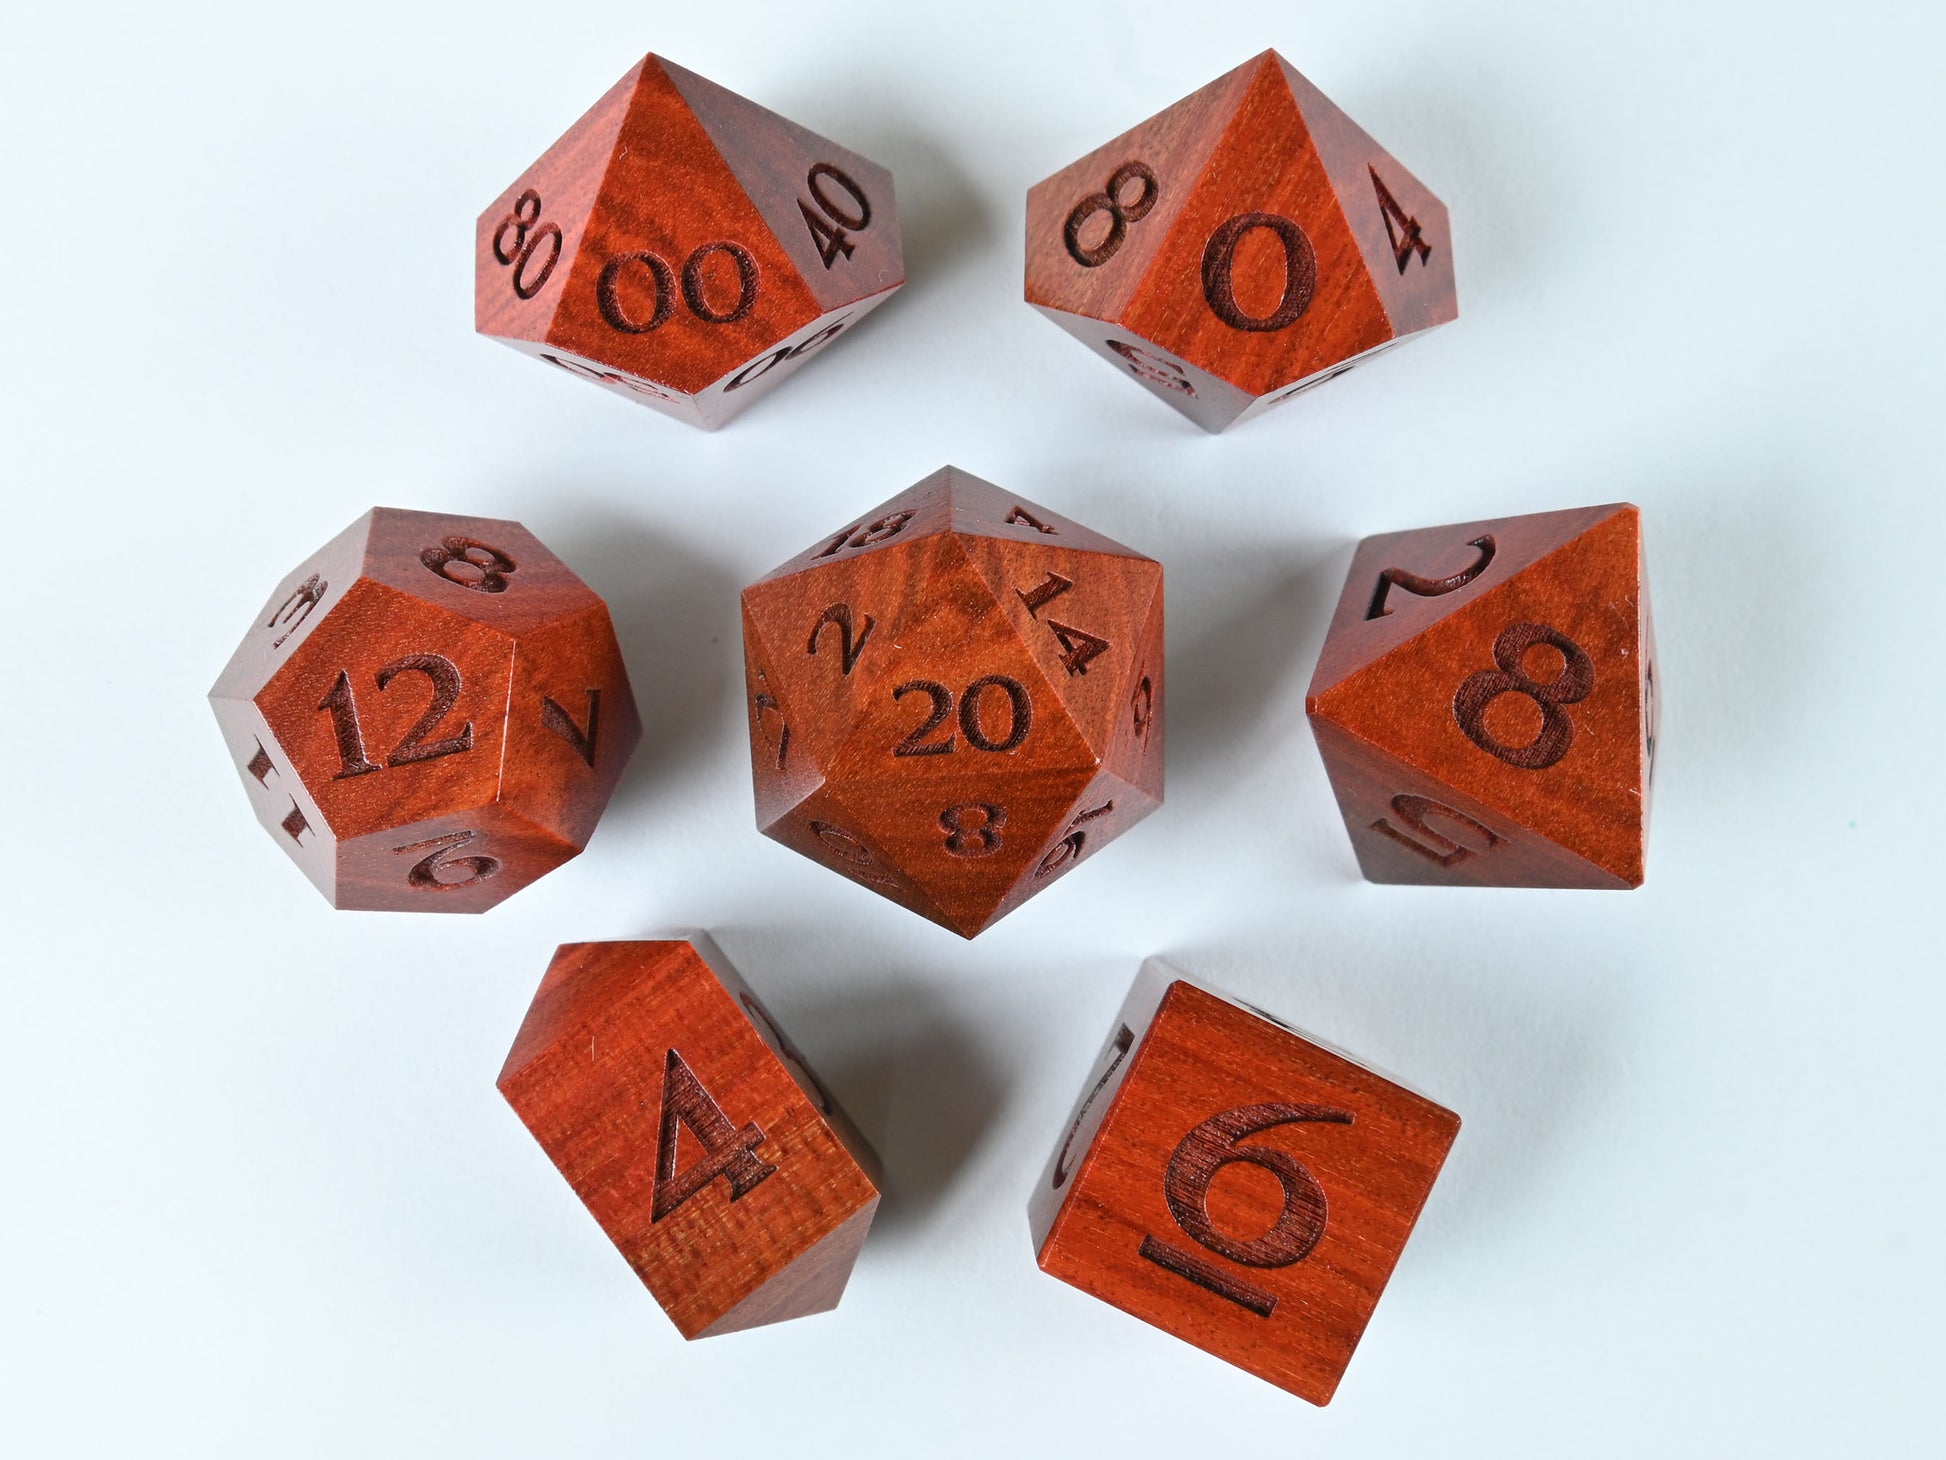 Redheart Dice set for dnd rpg